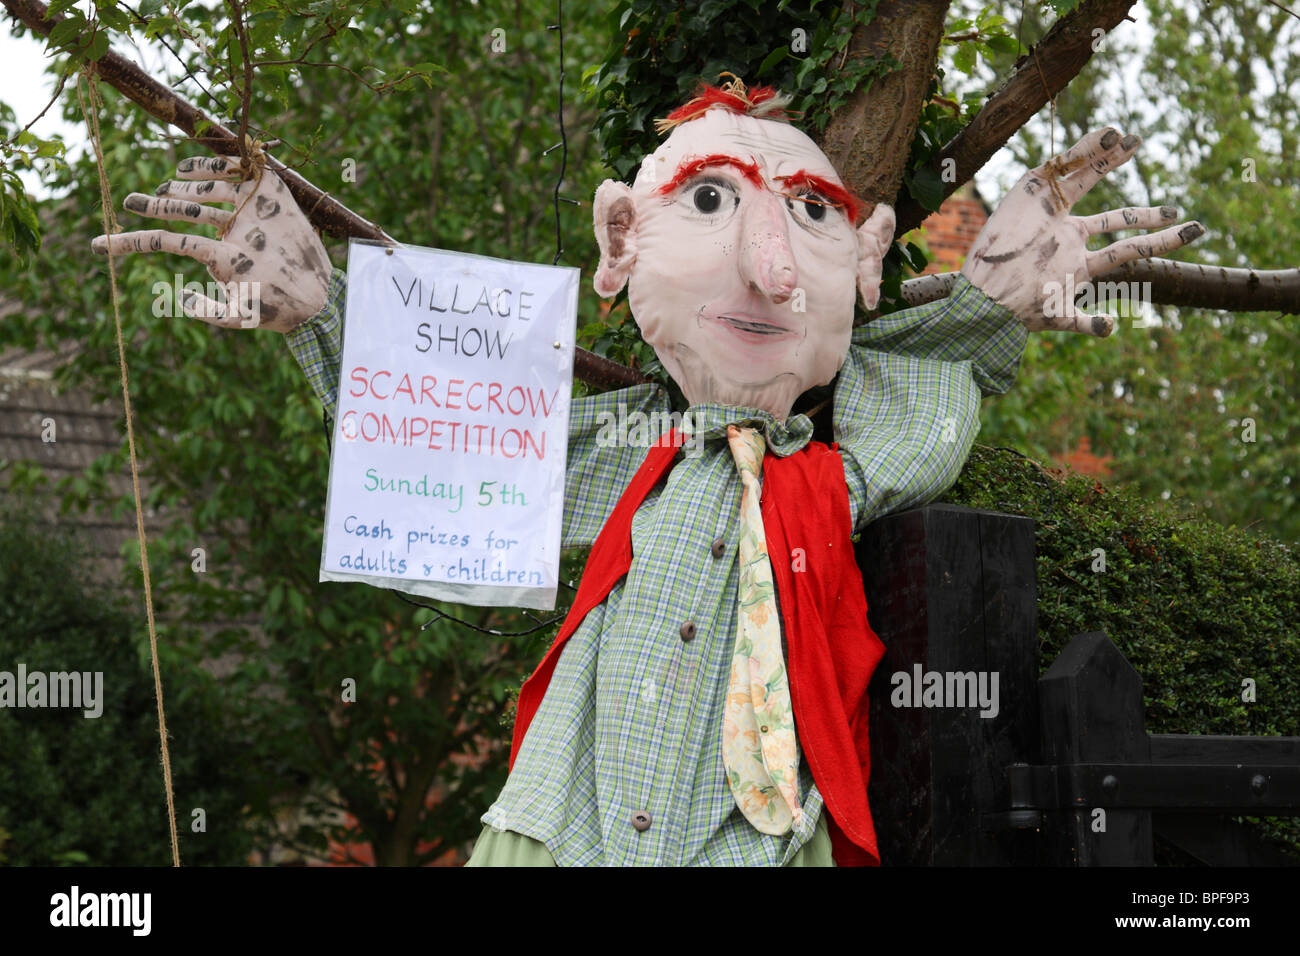 A scarecrow competition at an English village show. Stock Photo